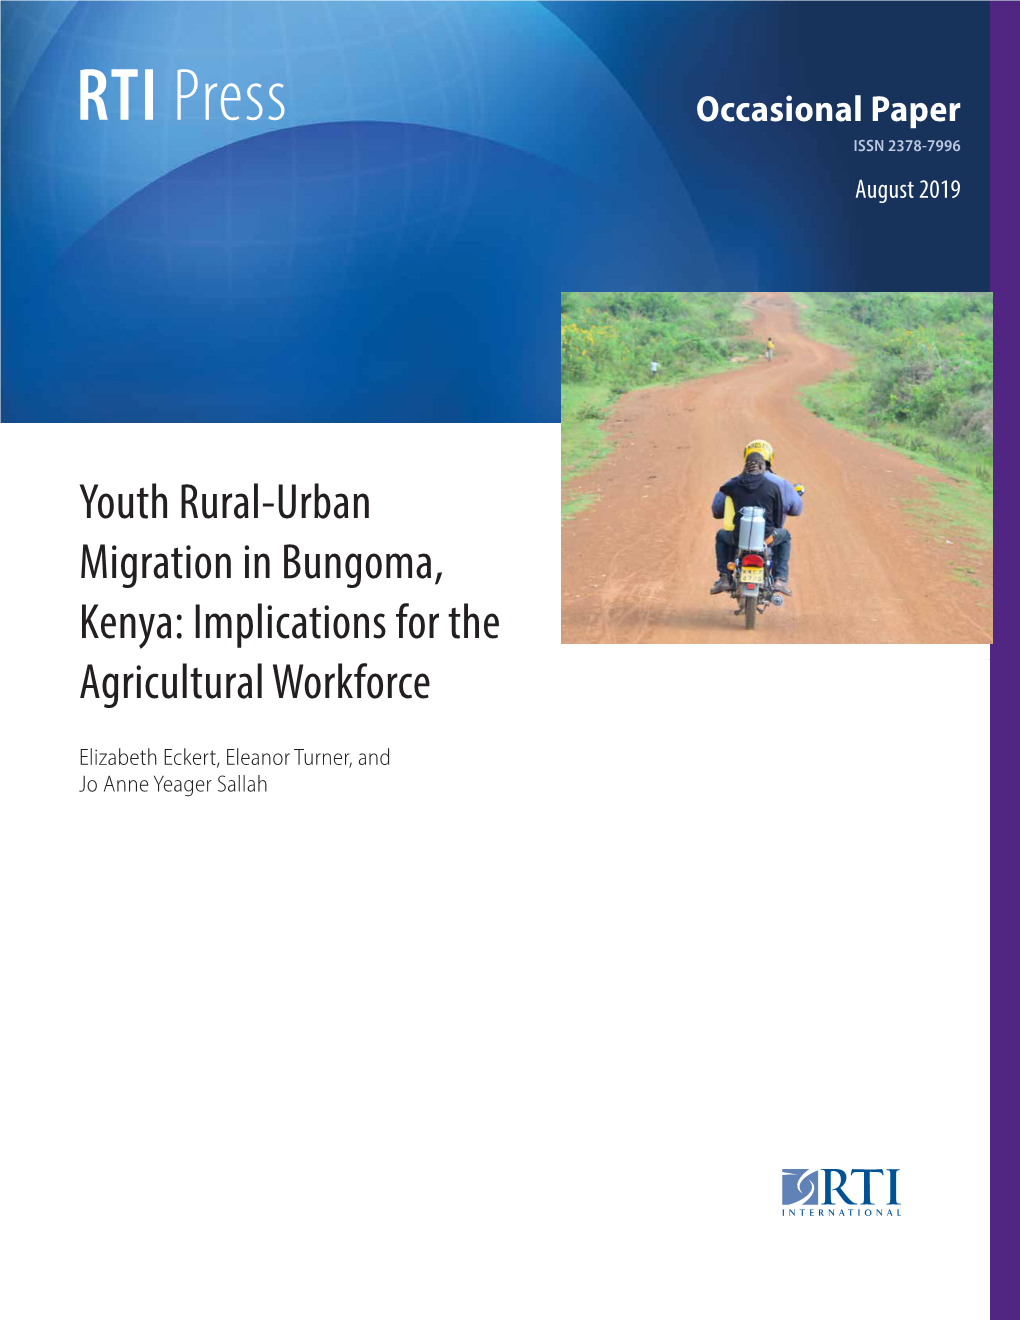 Youth Rural-Urban Migration in Bungoma, Kenya: Implications for the Agricultural Workforce